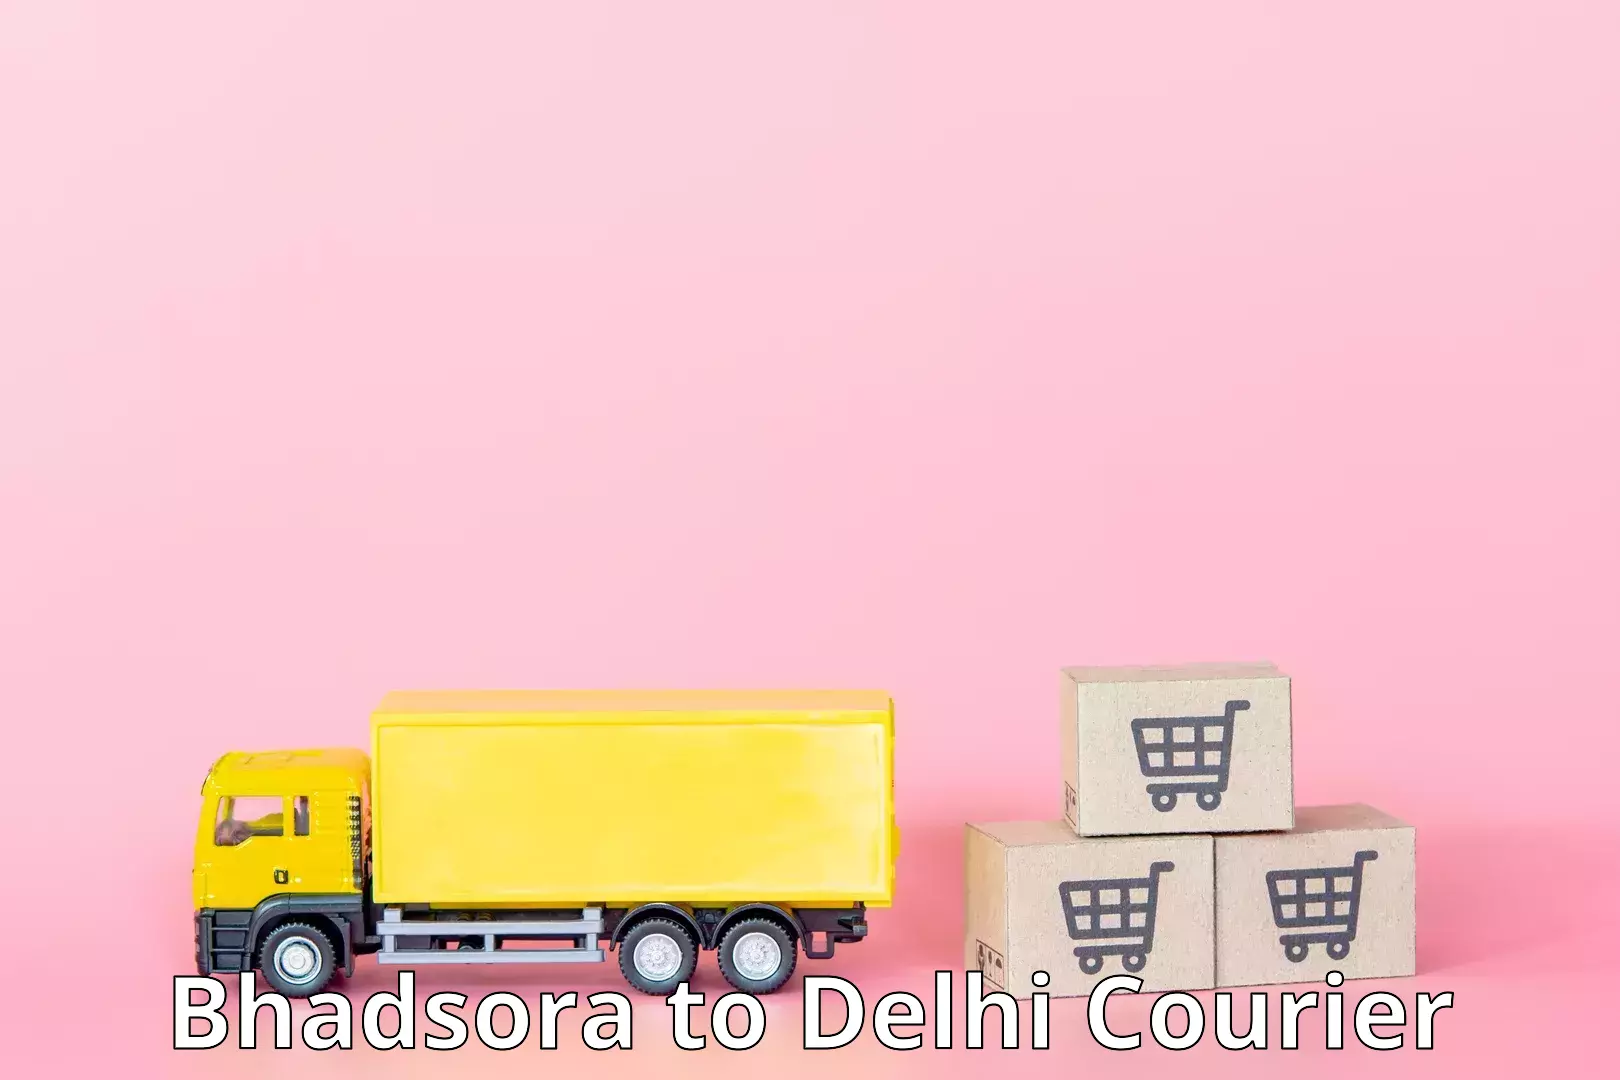 Parcel handling and care Bhadsora to Delhi